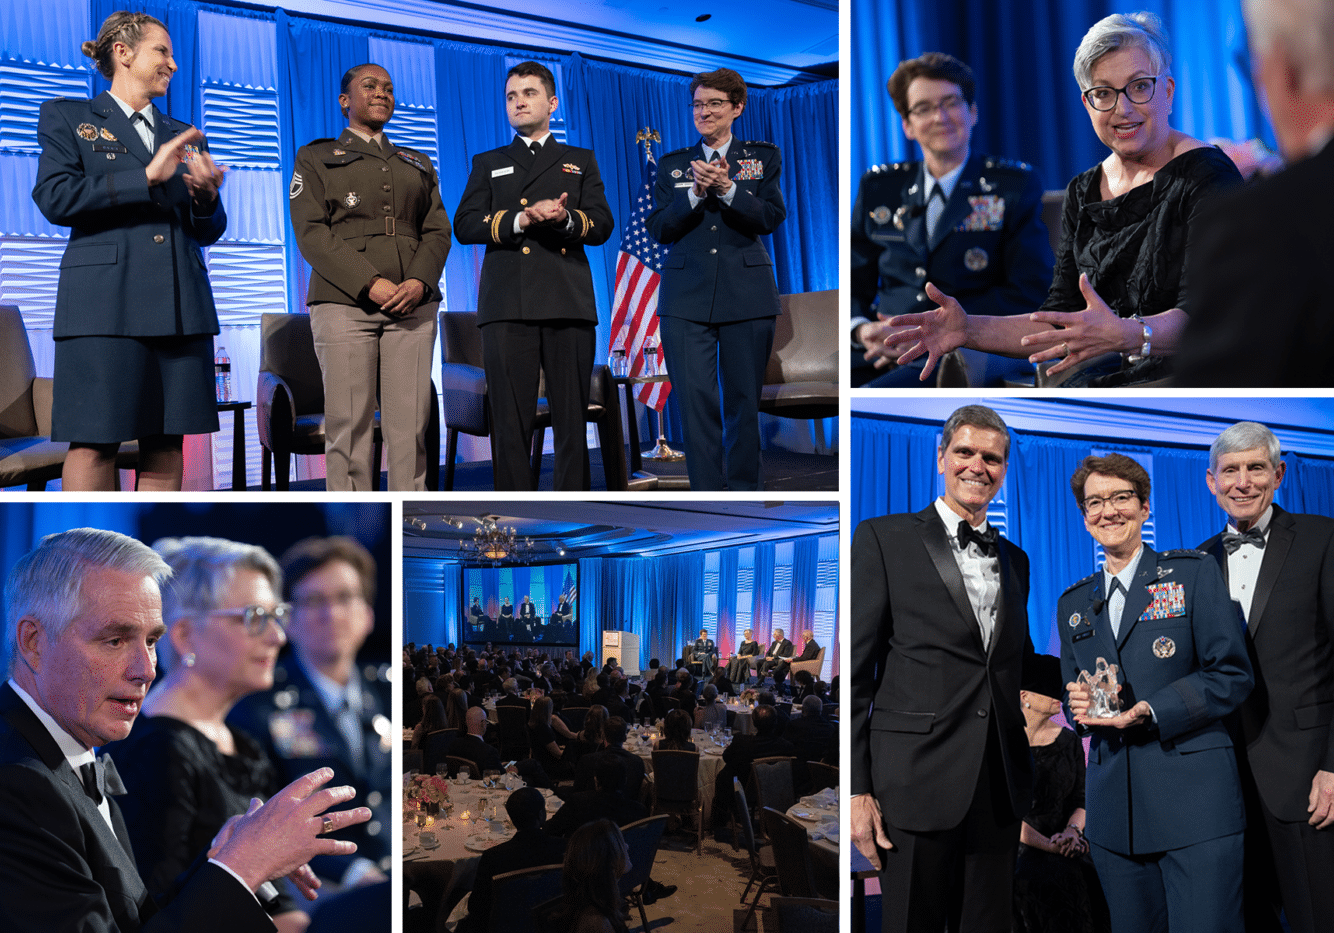 collage of images at the 2022 Eisenhower Awards gala